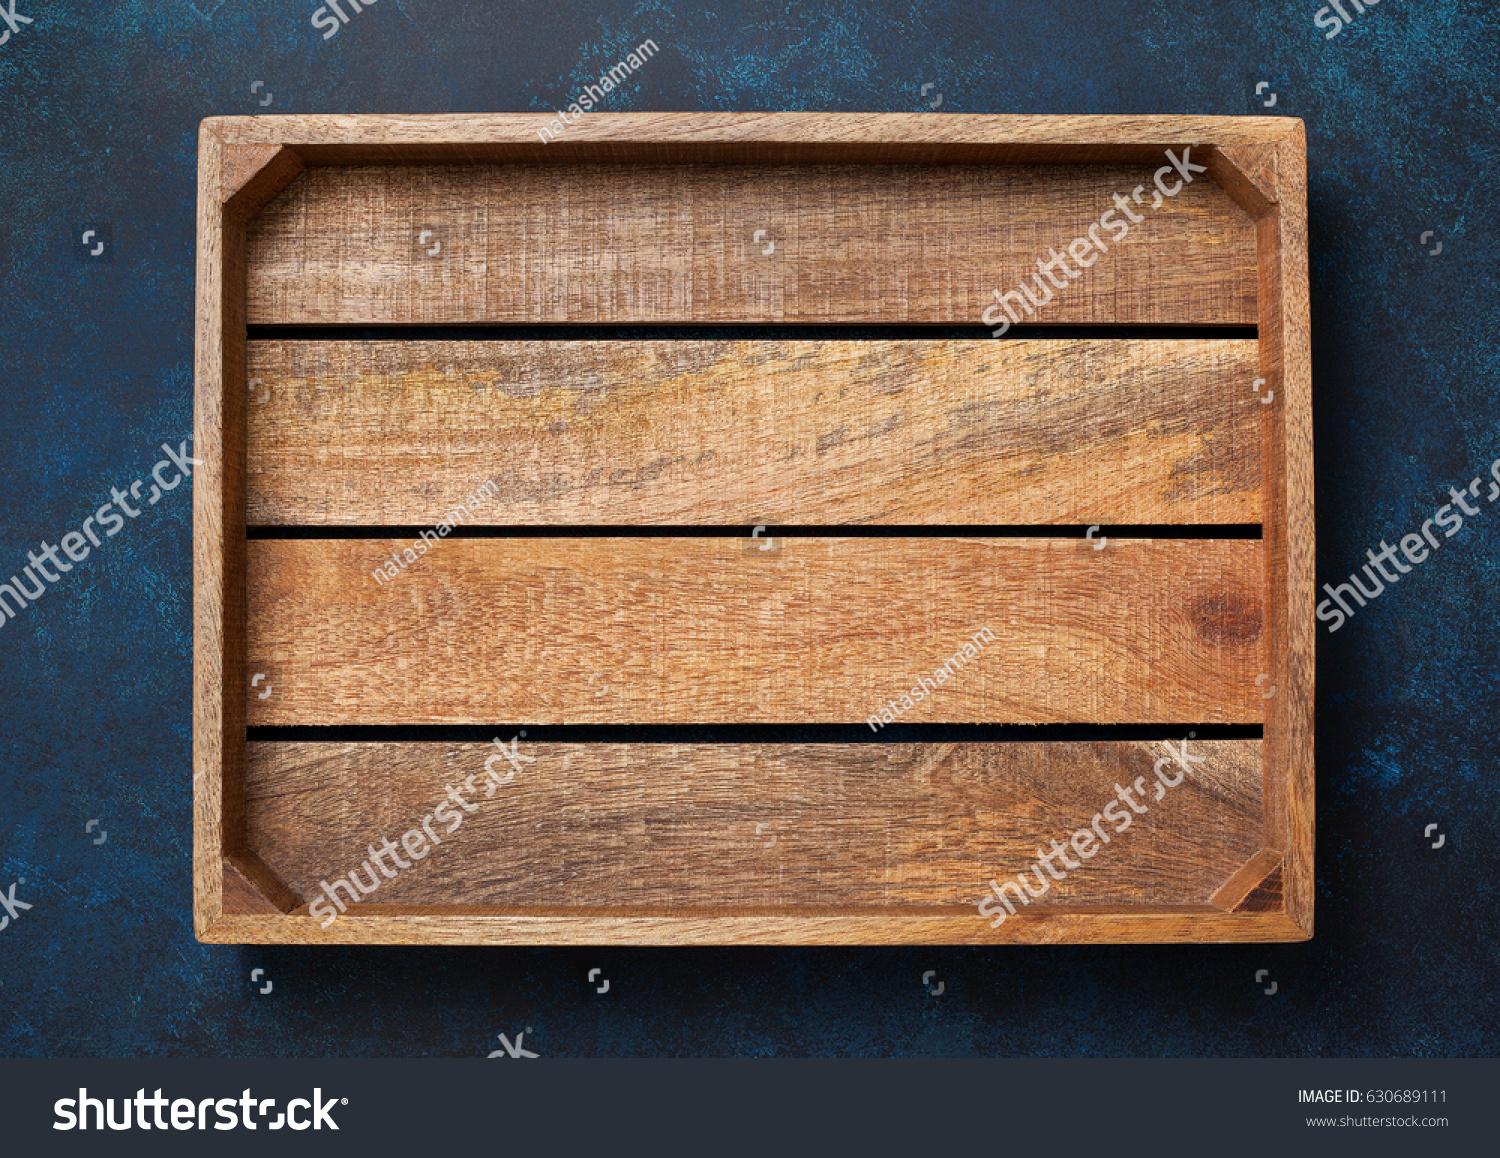 Empty wooden box on blue background. View from above. Copy space #630689111